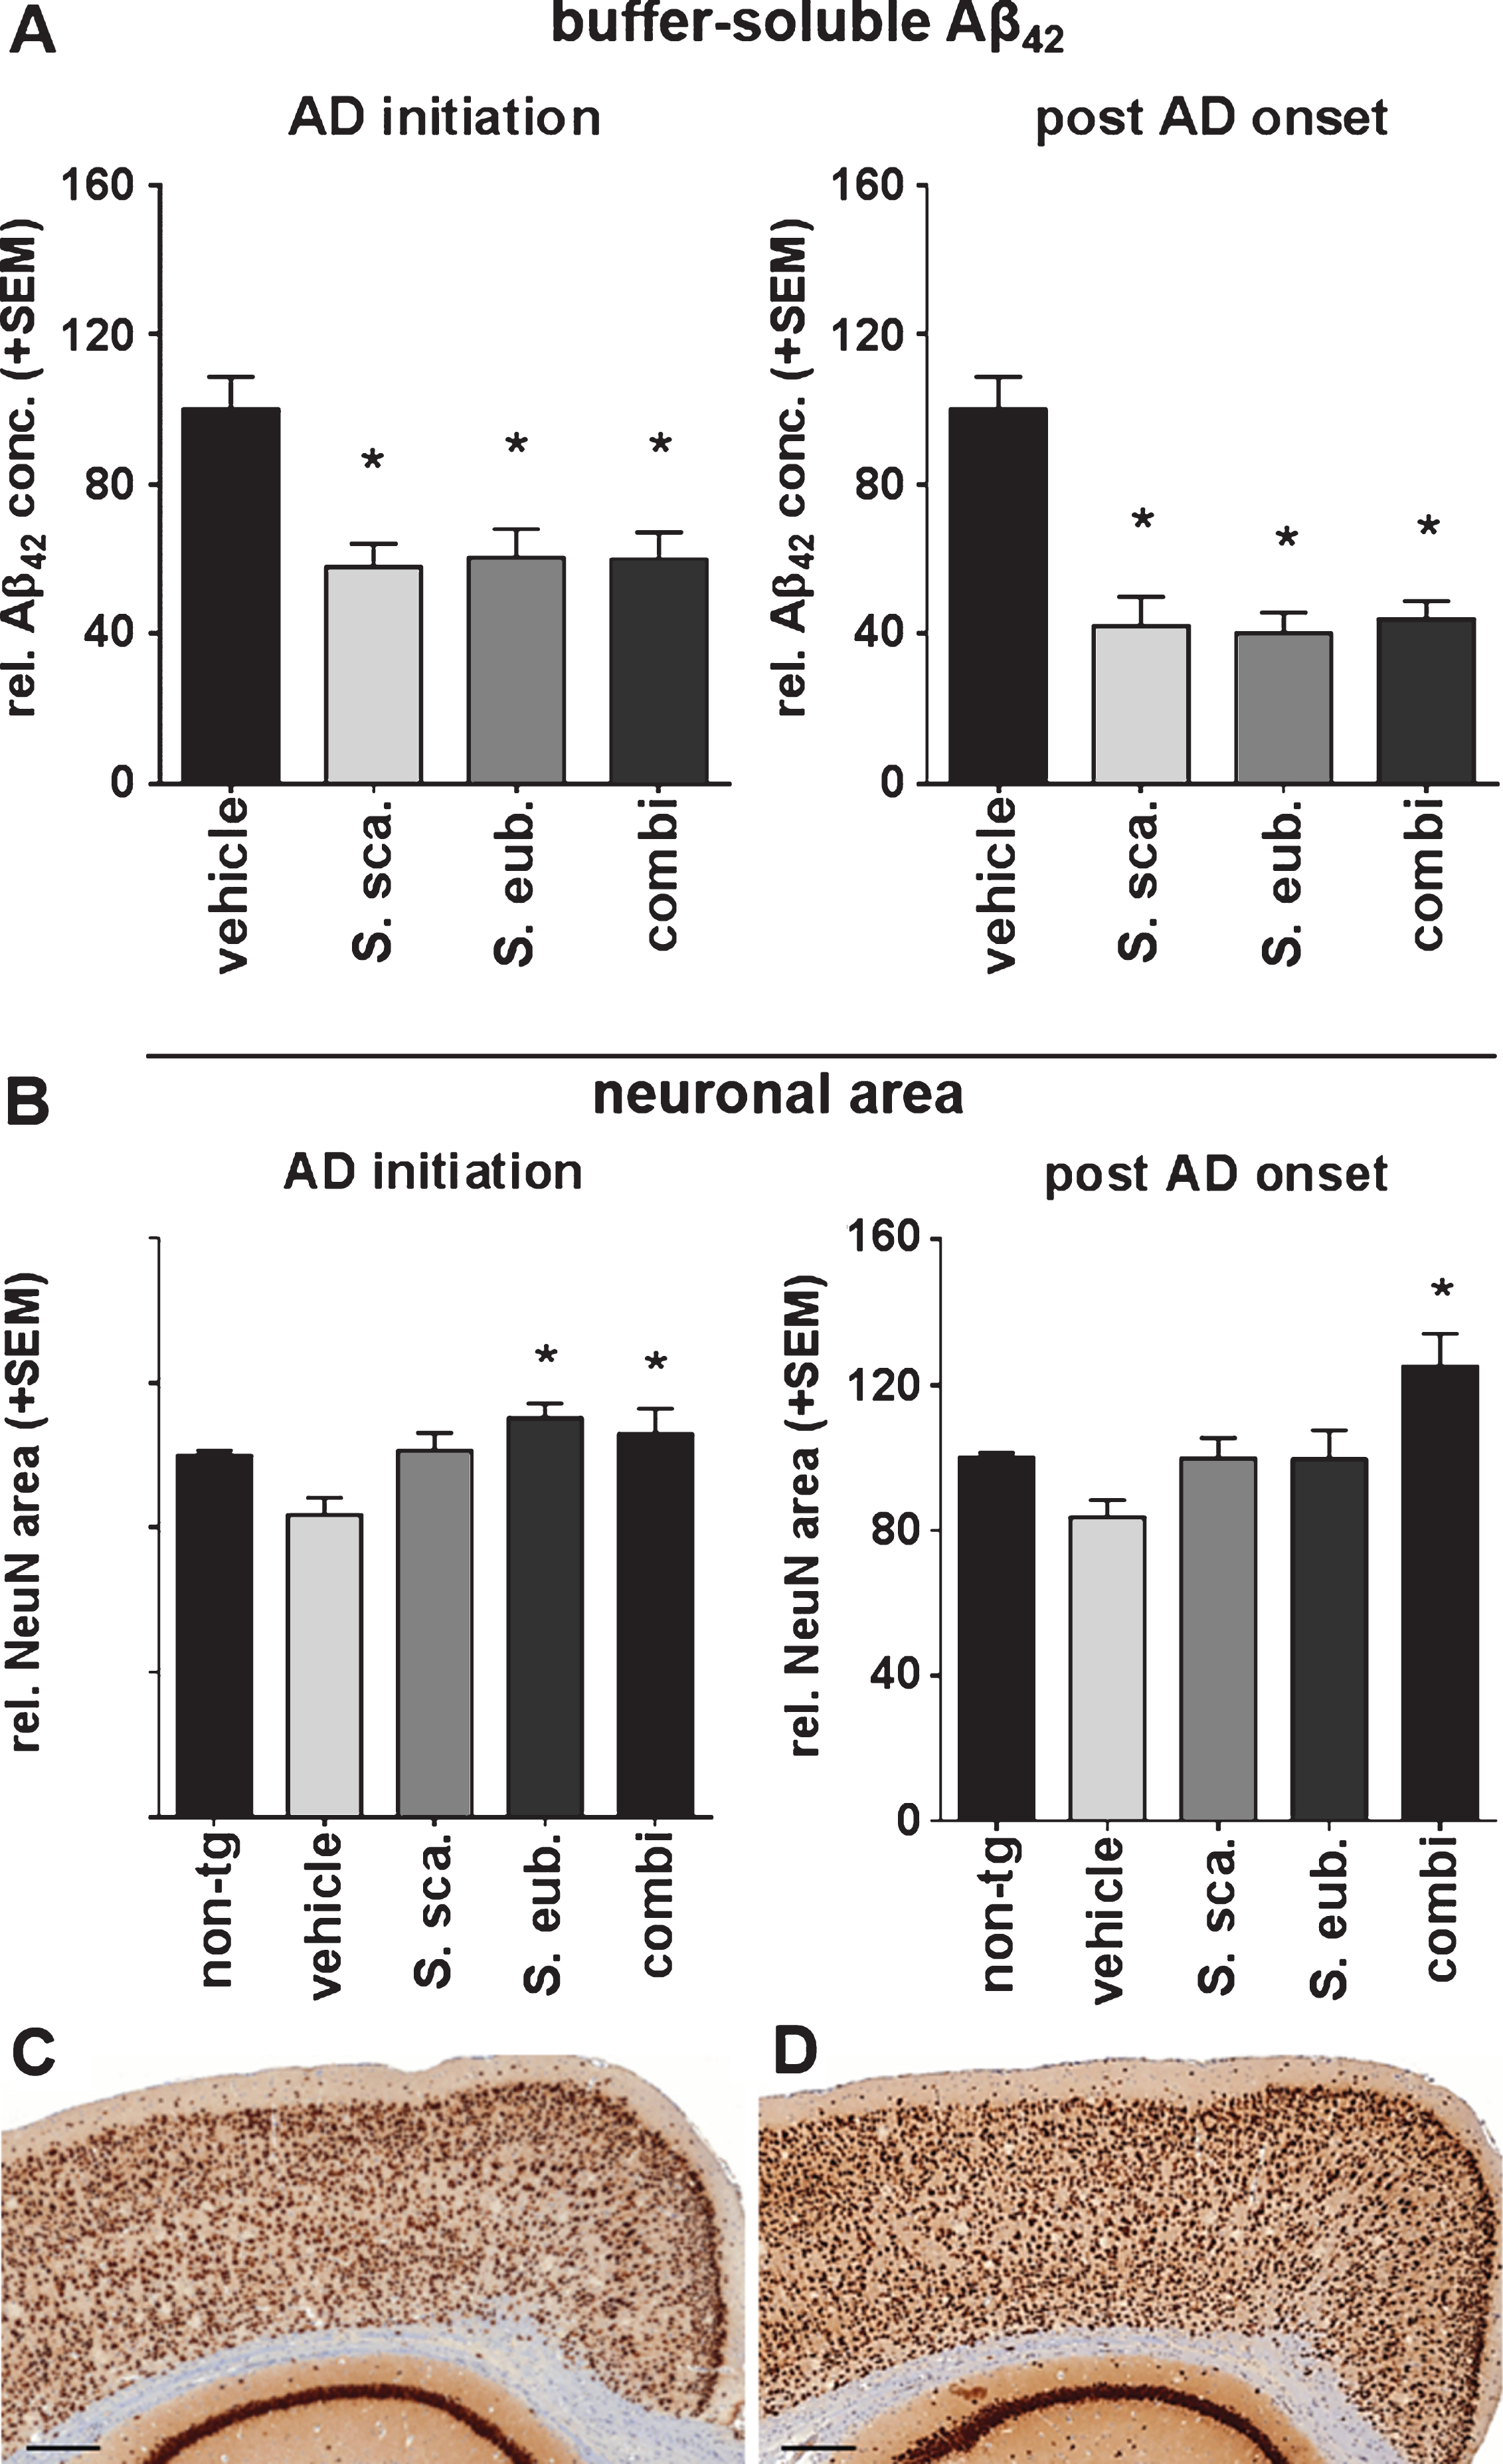 Sideritis spp. potently reduce neurotoxic brain Aβ42 levels and protect from neuronal loss. A) S. scardica, S. euboea, and the extract combination reduce buffer-soluble Aβ42 significantly in both treatment strategies. B) Quantification of neuronal area indicated significant neuron loss in vehicle-treated APP-tg mice in comparison to vehicle-treated, non-transgenic littermates. A significantly increased neuronal area of Sideritis spp.-treated APP-tg mice compared to vehicle treated APP-tg mice indicates neuroprotective effects of the Sideritis spp. extract combination in both paradigms (mean + SEM, *p≤0.05). C, D) Microphotographs of NeuN stained brain slices of APP-tg mice after (C) vehicle treatment and (D) post-AD-onset therapy with Sideritis spp. extract combination (scale bars: 50μm).